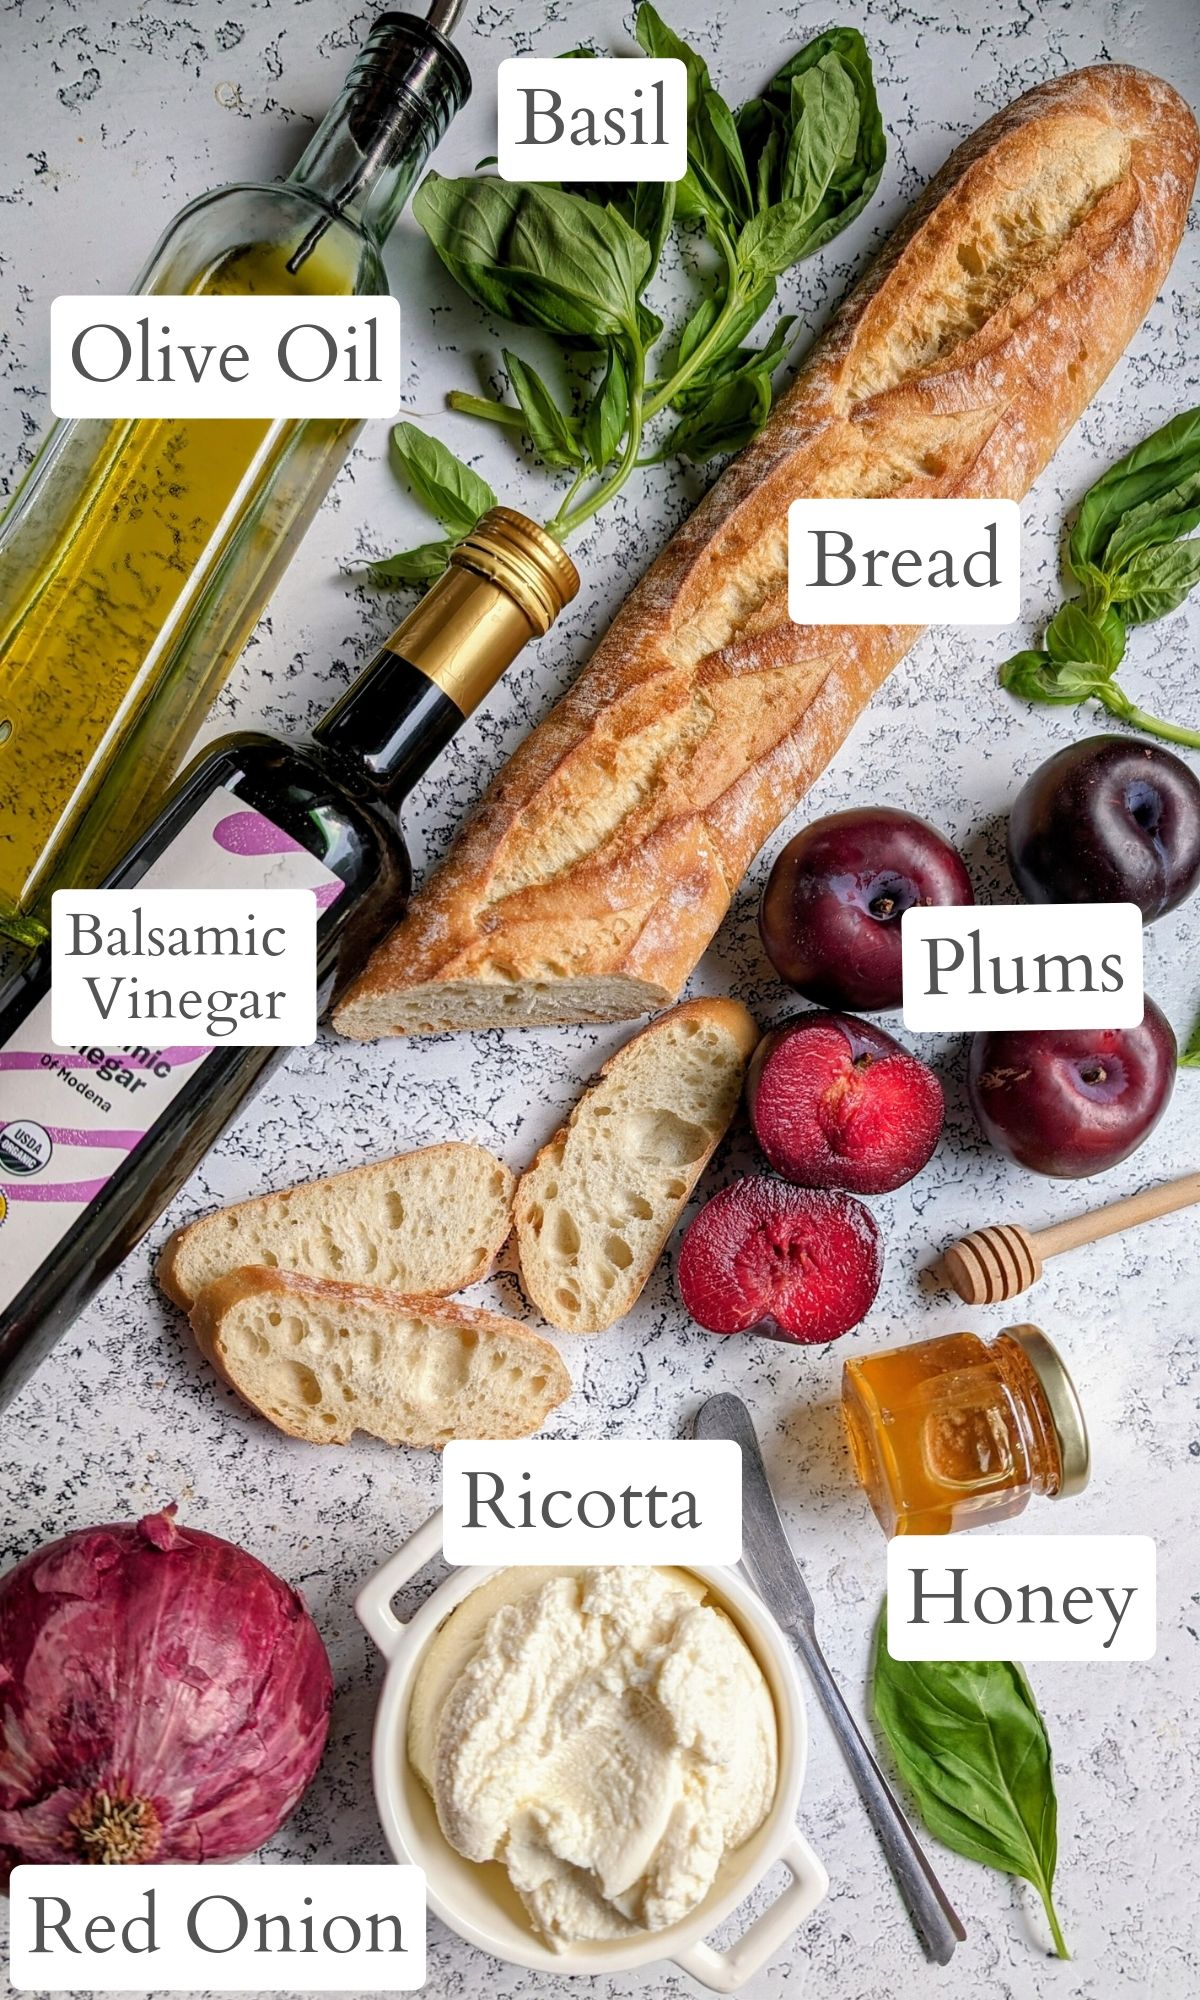 ingredients for plum bruschetta with ricotta cheese: olive oil, balsamic vinegar, red plums, honey, basil, bread, and red onion.